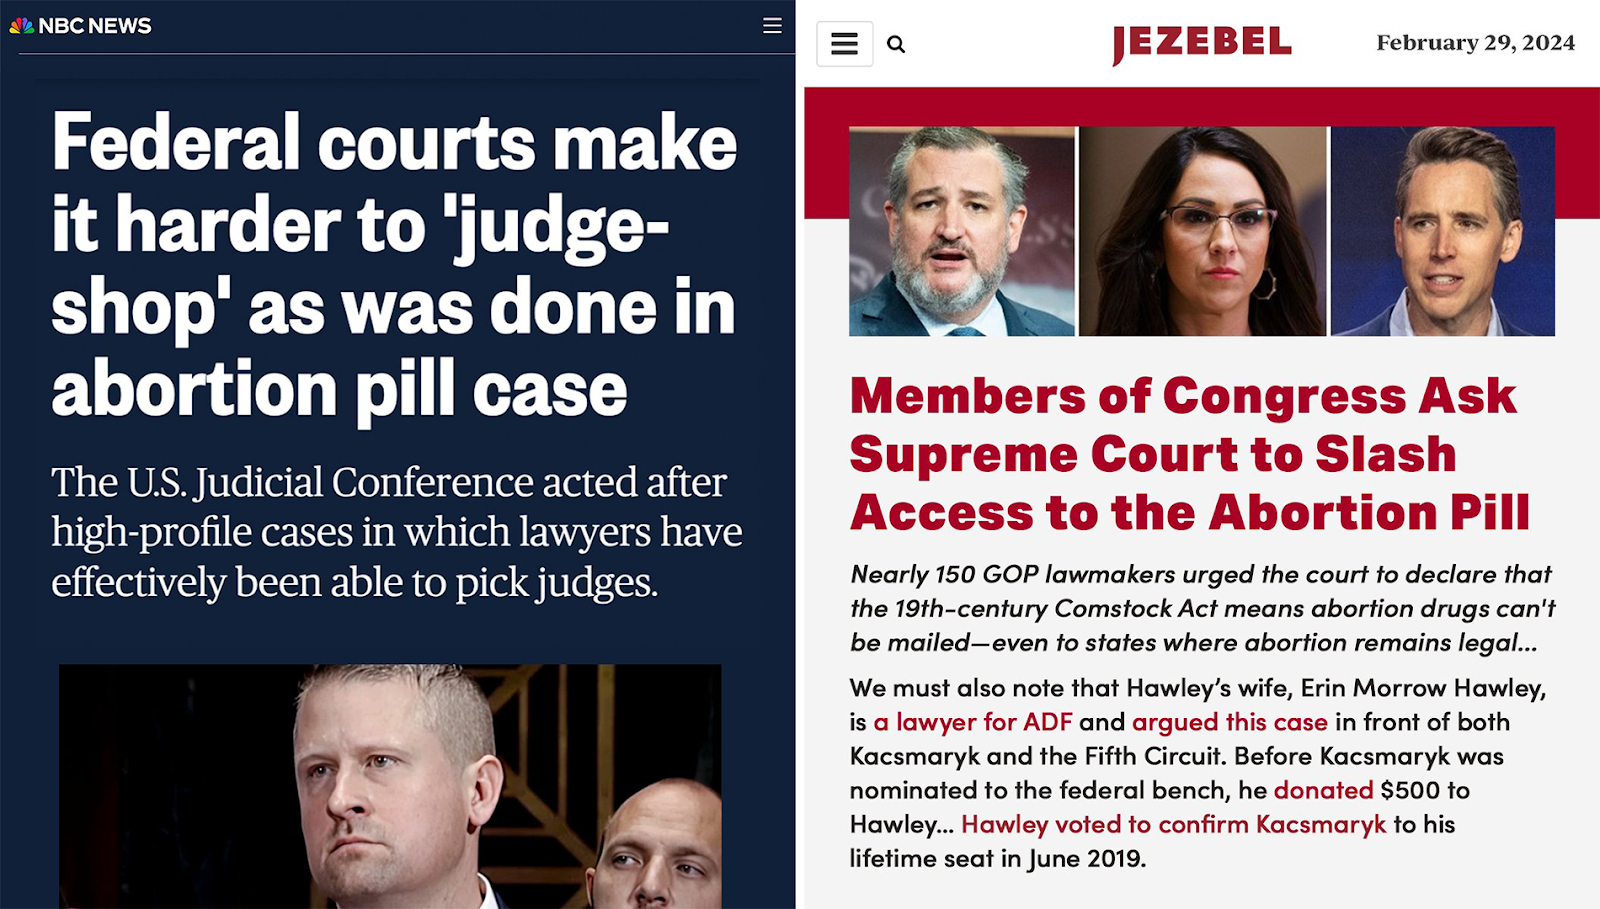 On the left, NBC News headline: Federal courts make it harder to 'judge-shop' as was done in abortion pill case. On the right, Jezebel headline: Members of Congress ask Supreme Court to Slash Access to the Abortion Pill.